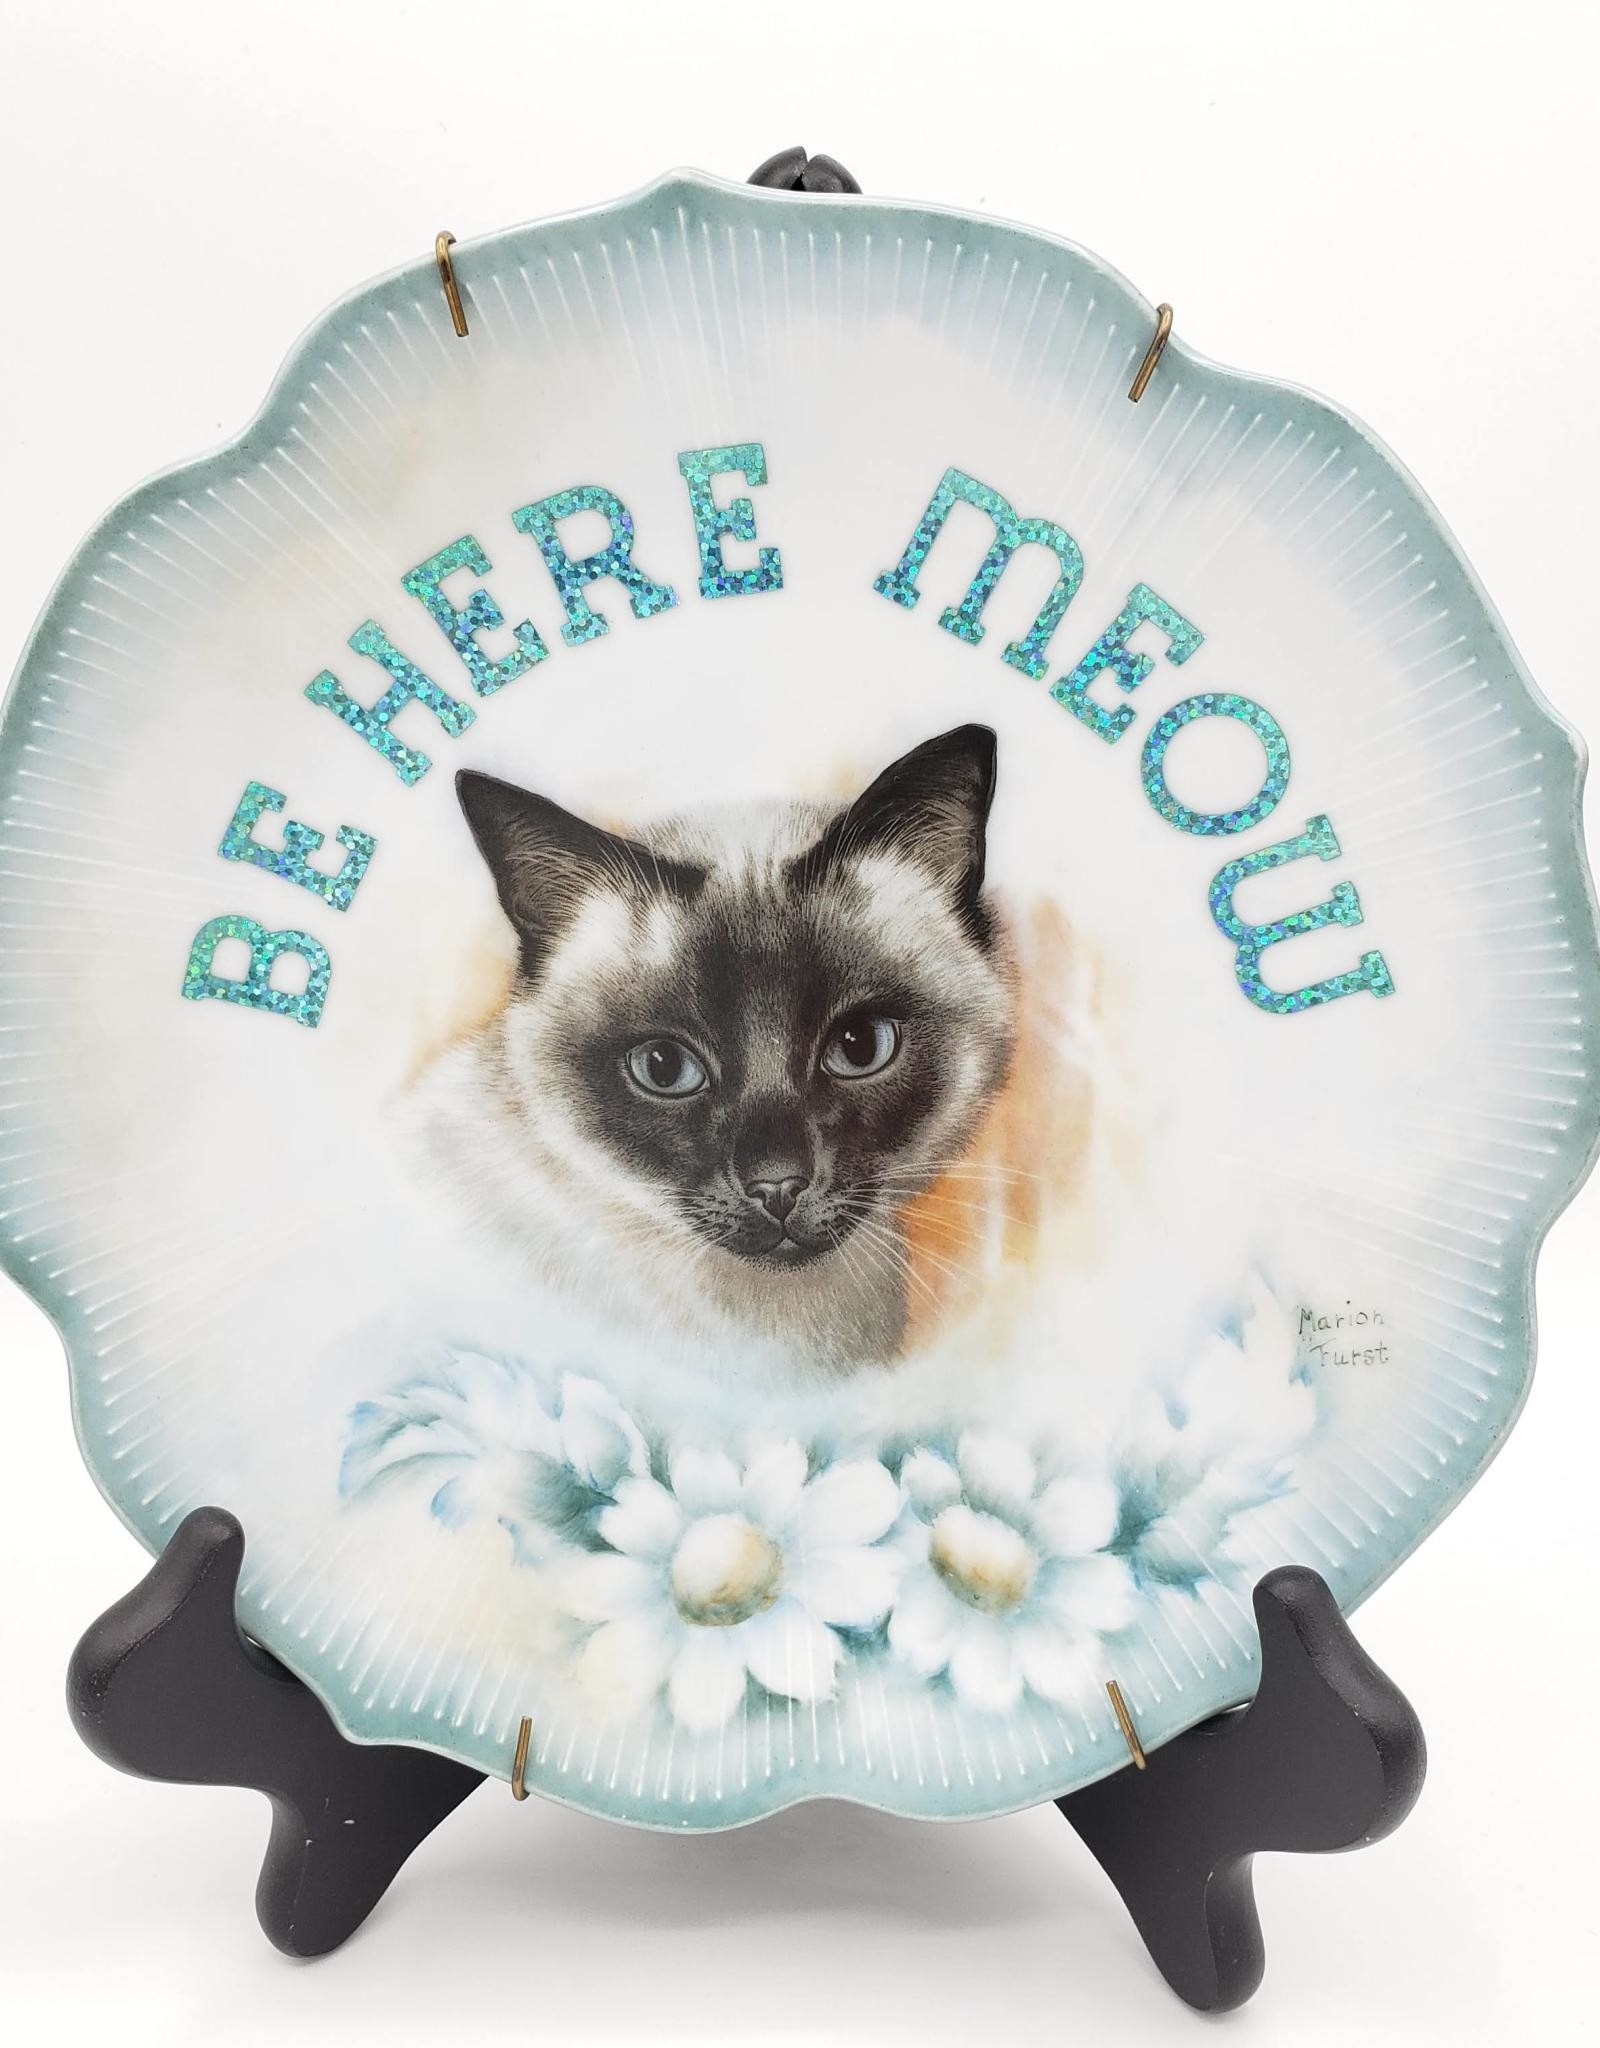 Redux "Be Here Meow" - Vintage Upcycled Plate Art